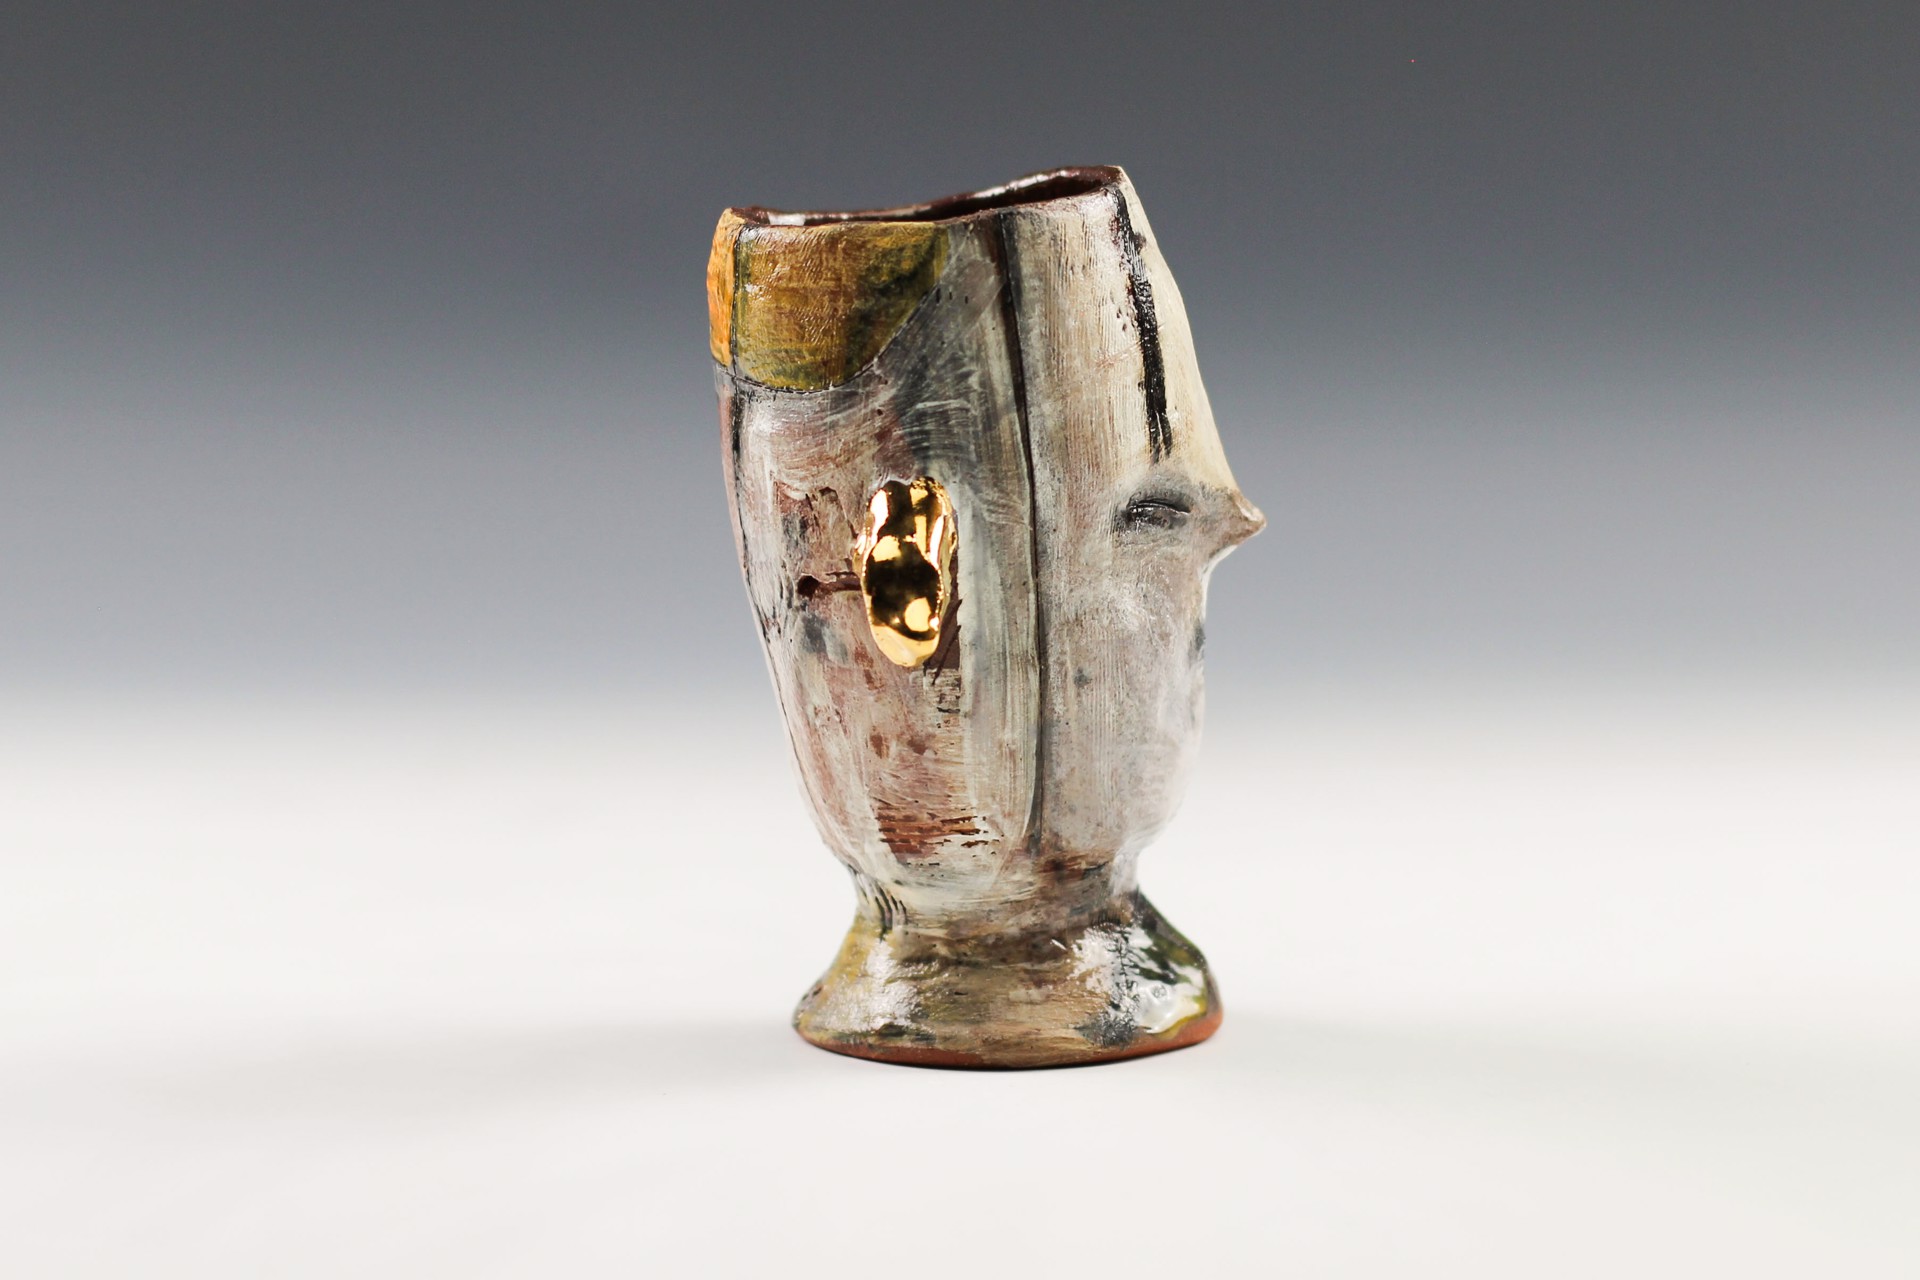 Cup by Stacey Johnson Hardy